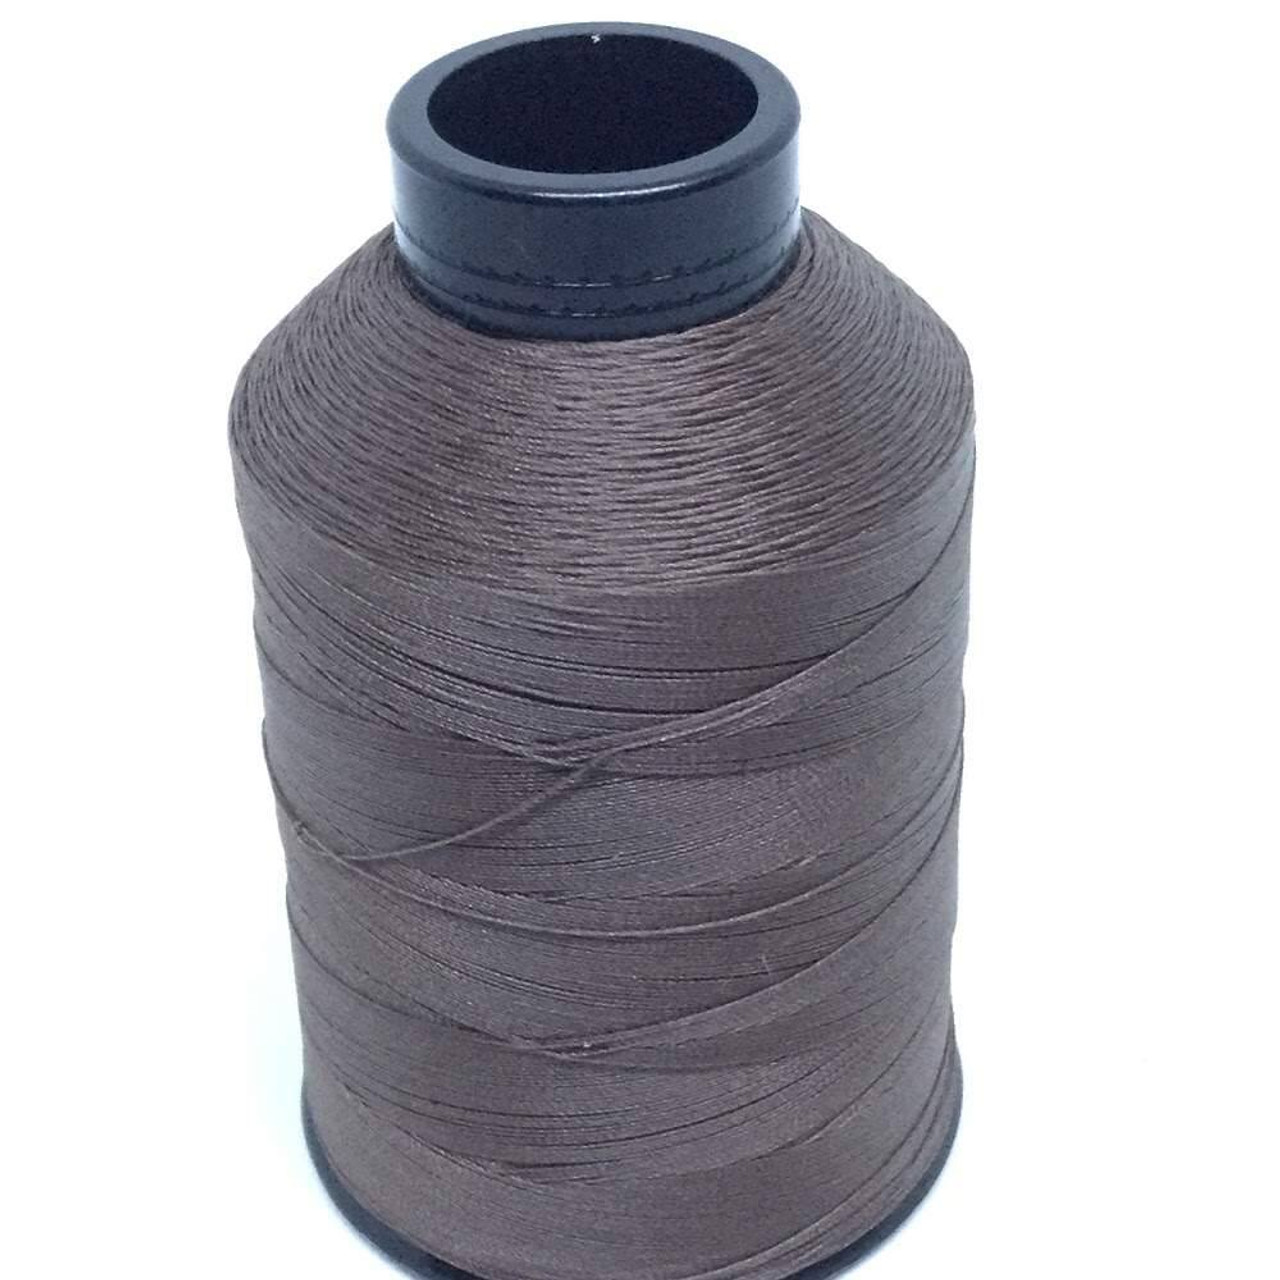 Brown Upholstery Thread | High Spec Bonded Nylon B69 | 4oz. Spool | EXTRA  STRONG